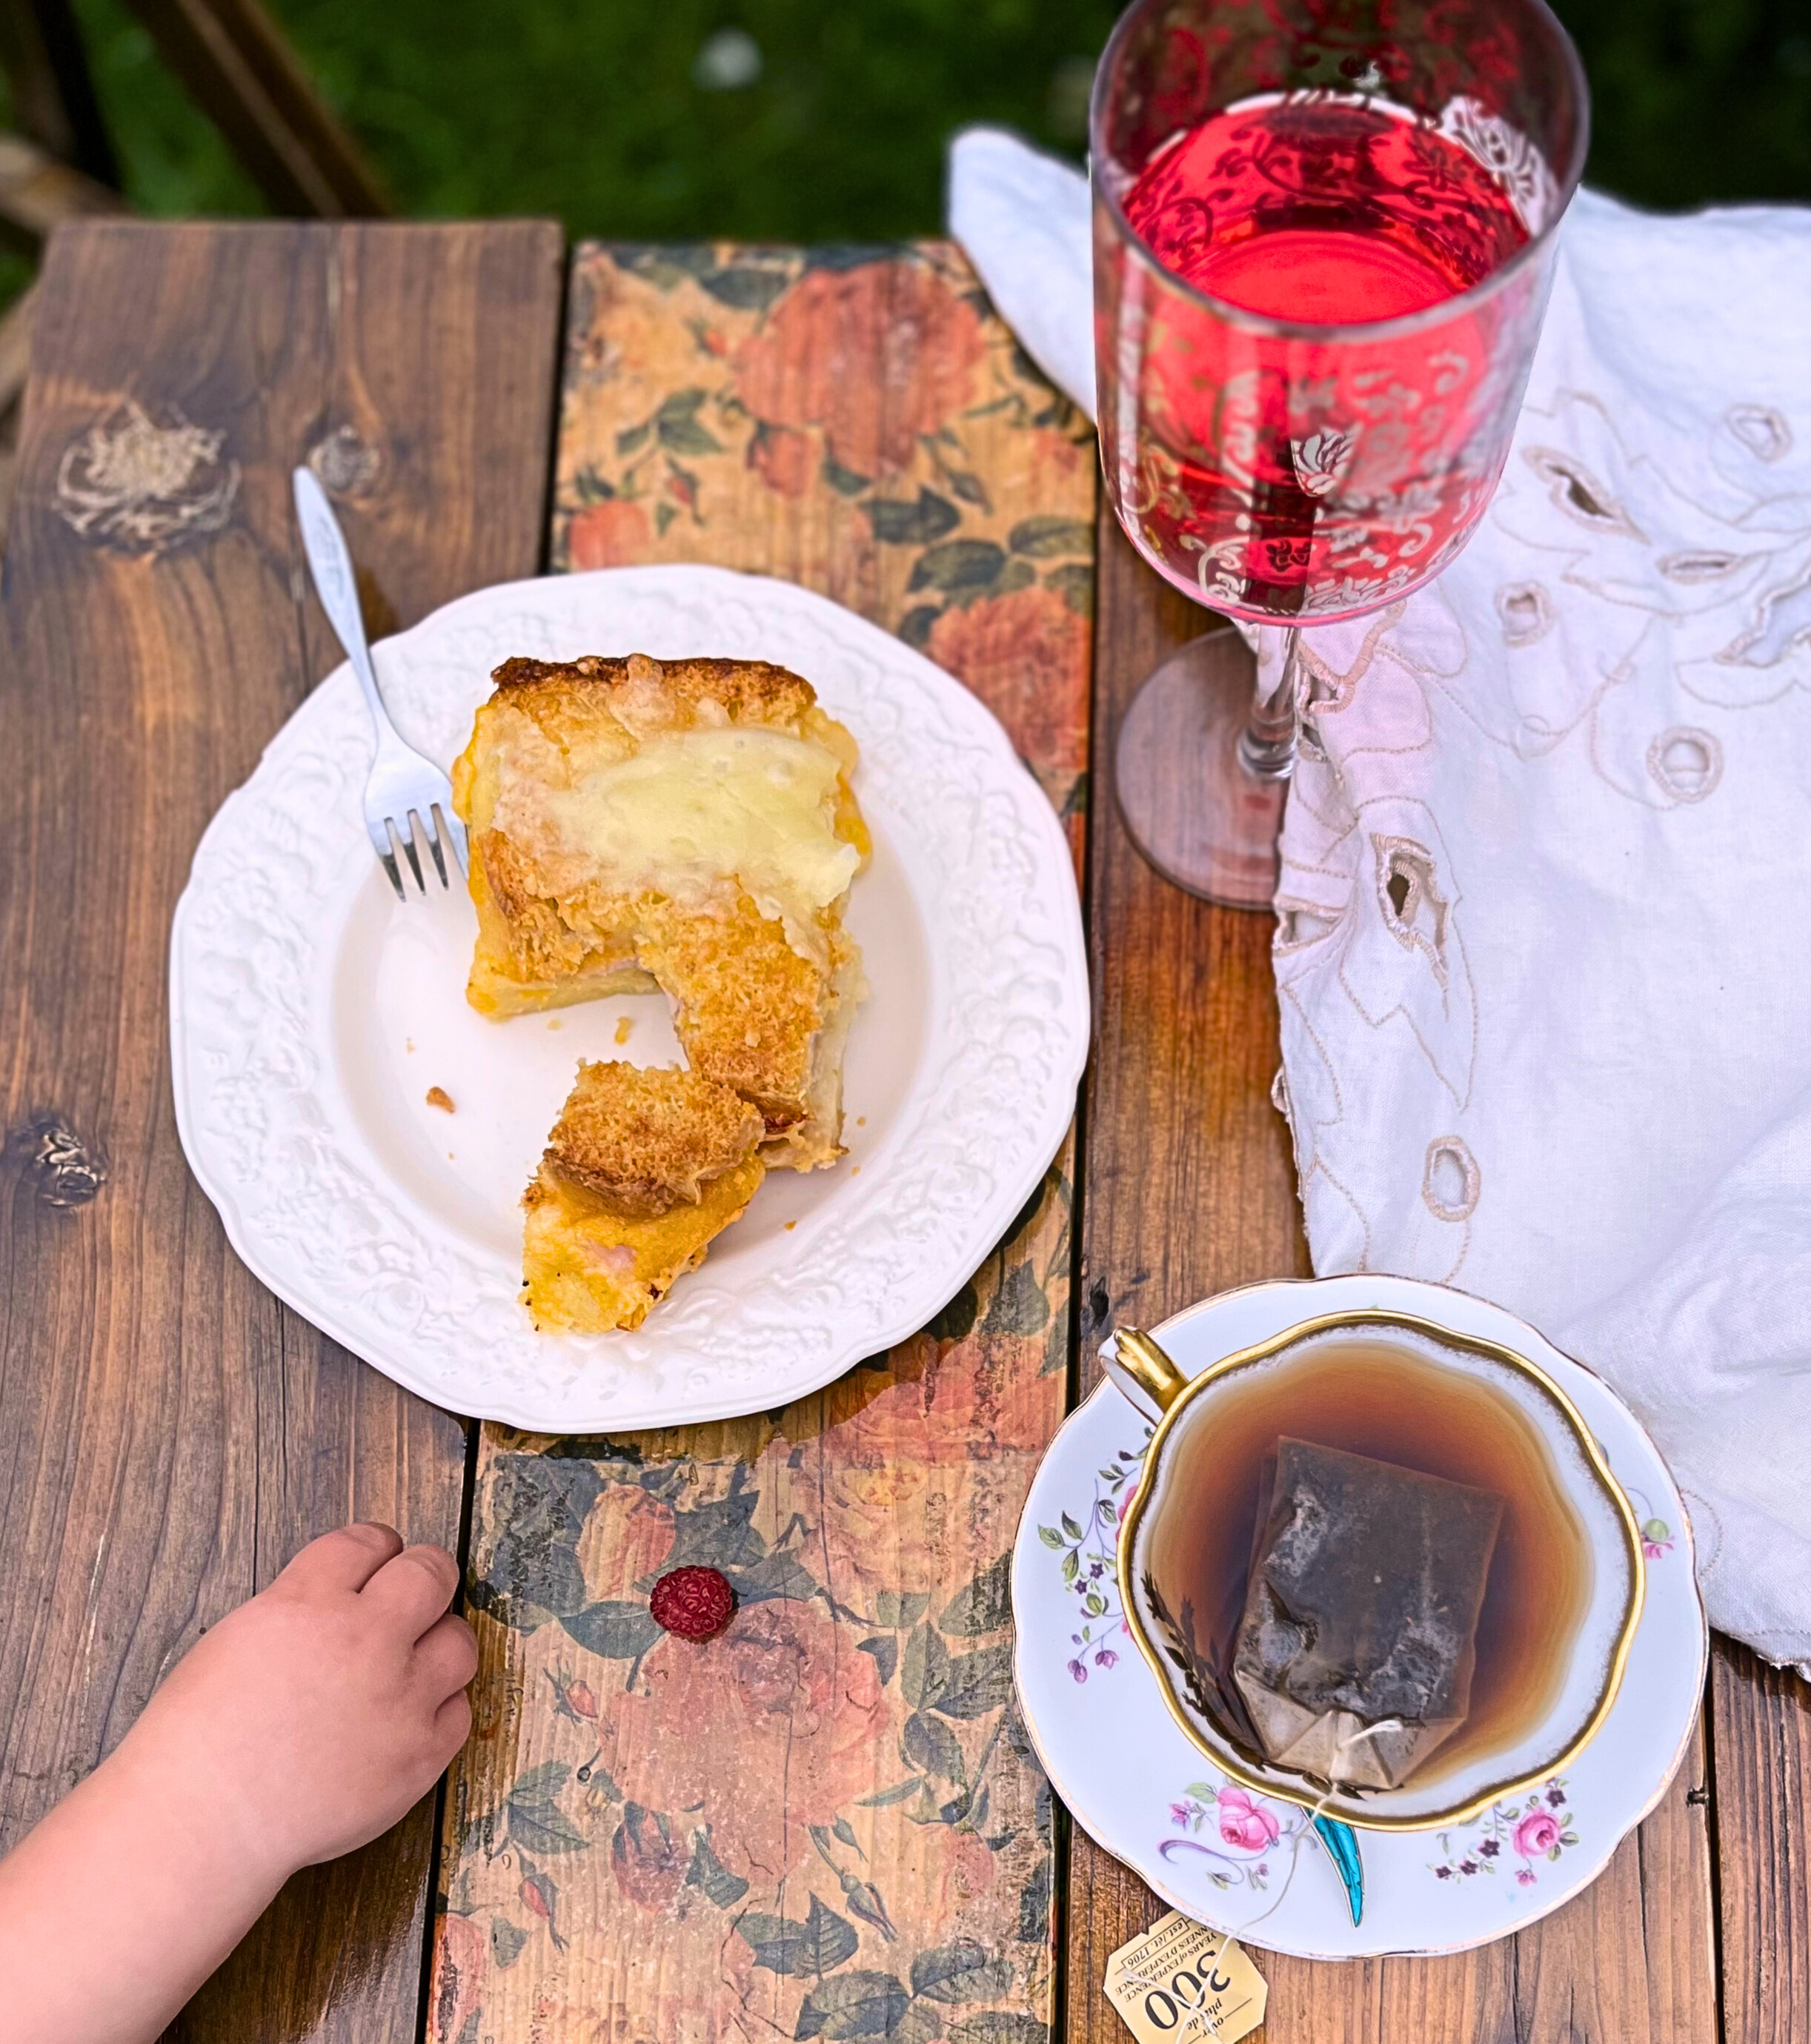 An overhead view of a wooden table with make ahead breakfast strata on a white plate with a metal fork, a cup of tea, and cranberry juice and a child's hand taking raspberries.